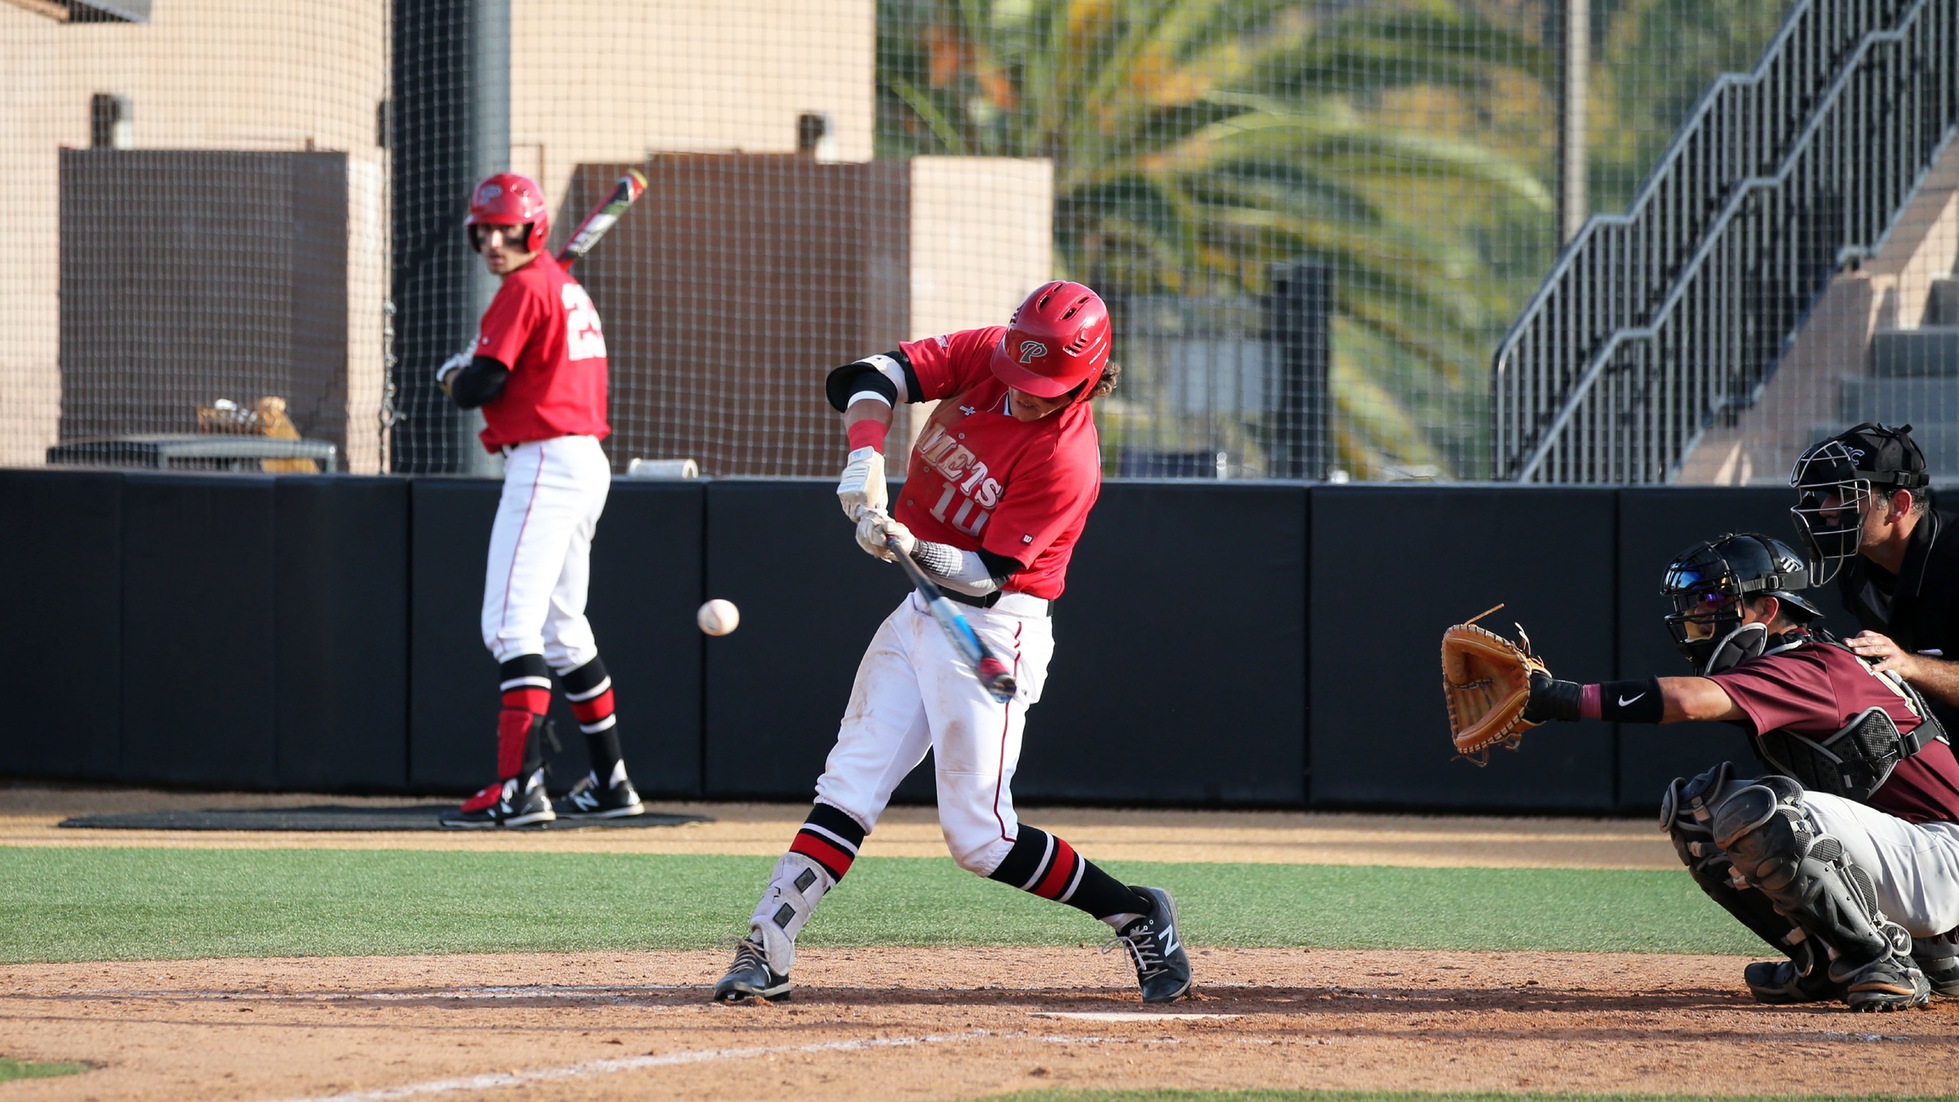 Brandon Luna was 3-5 between the two games with one RBI and five runs. Photo by Hugh Cox (taken 3/5).